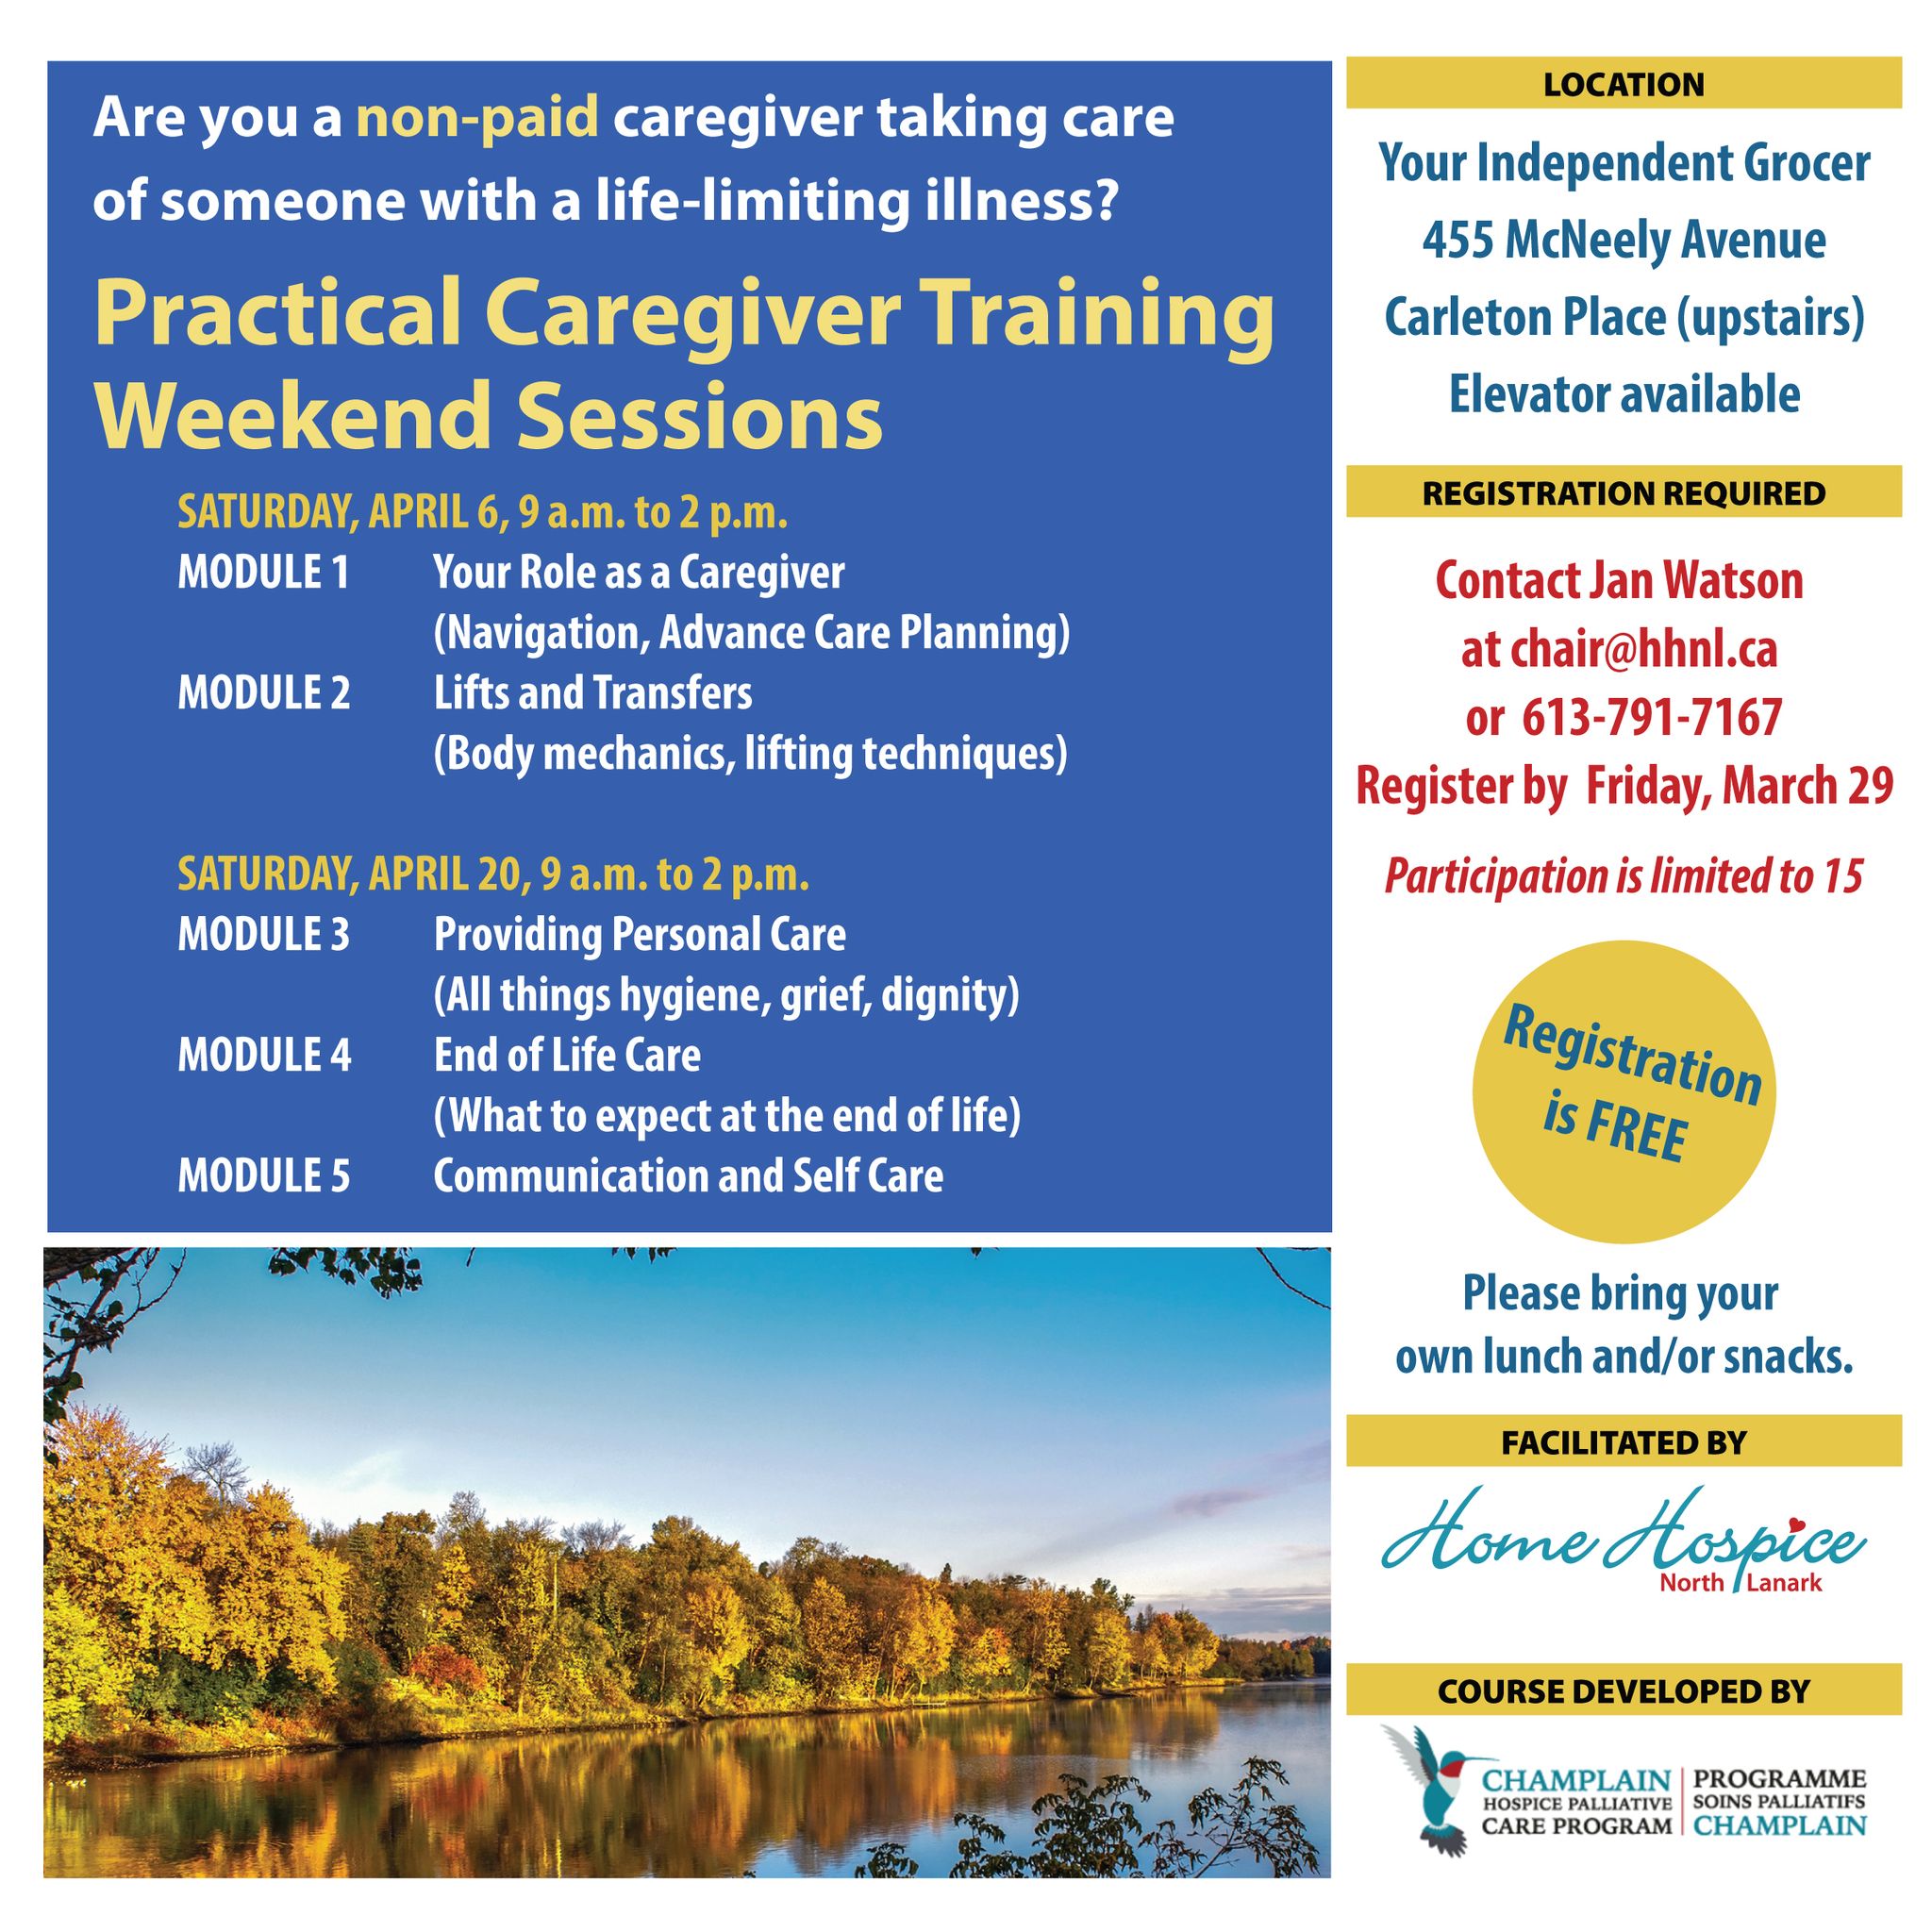 Poster advertising Home Hospice North Lanark practical caregiver training sessions